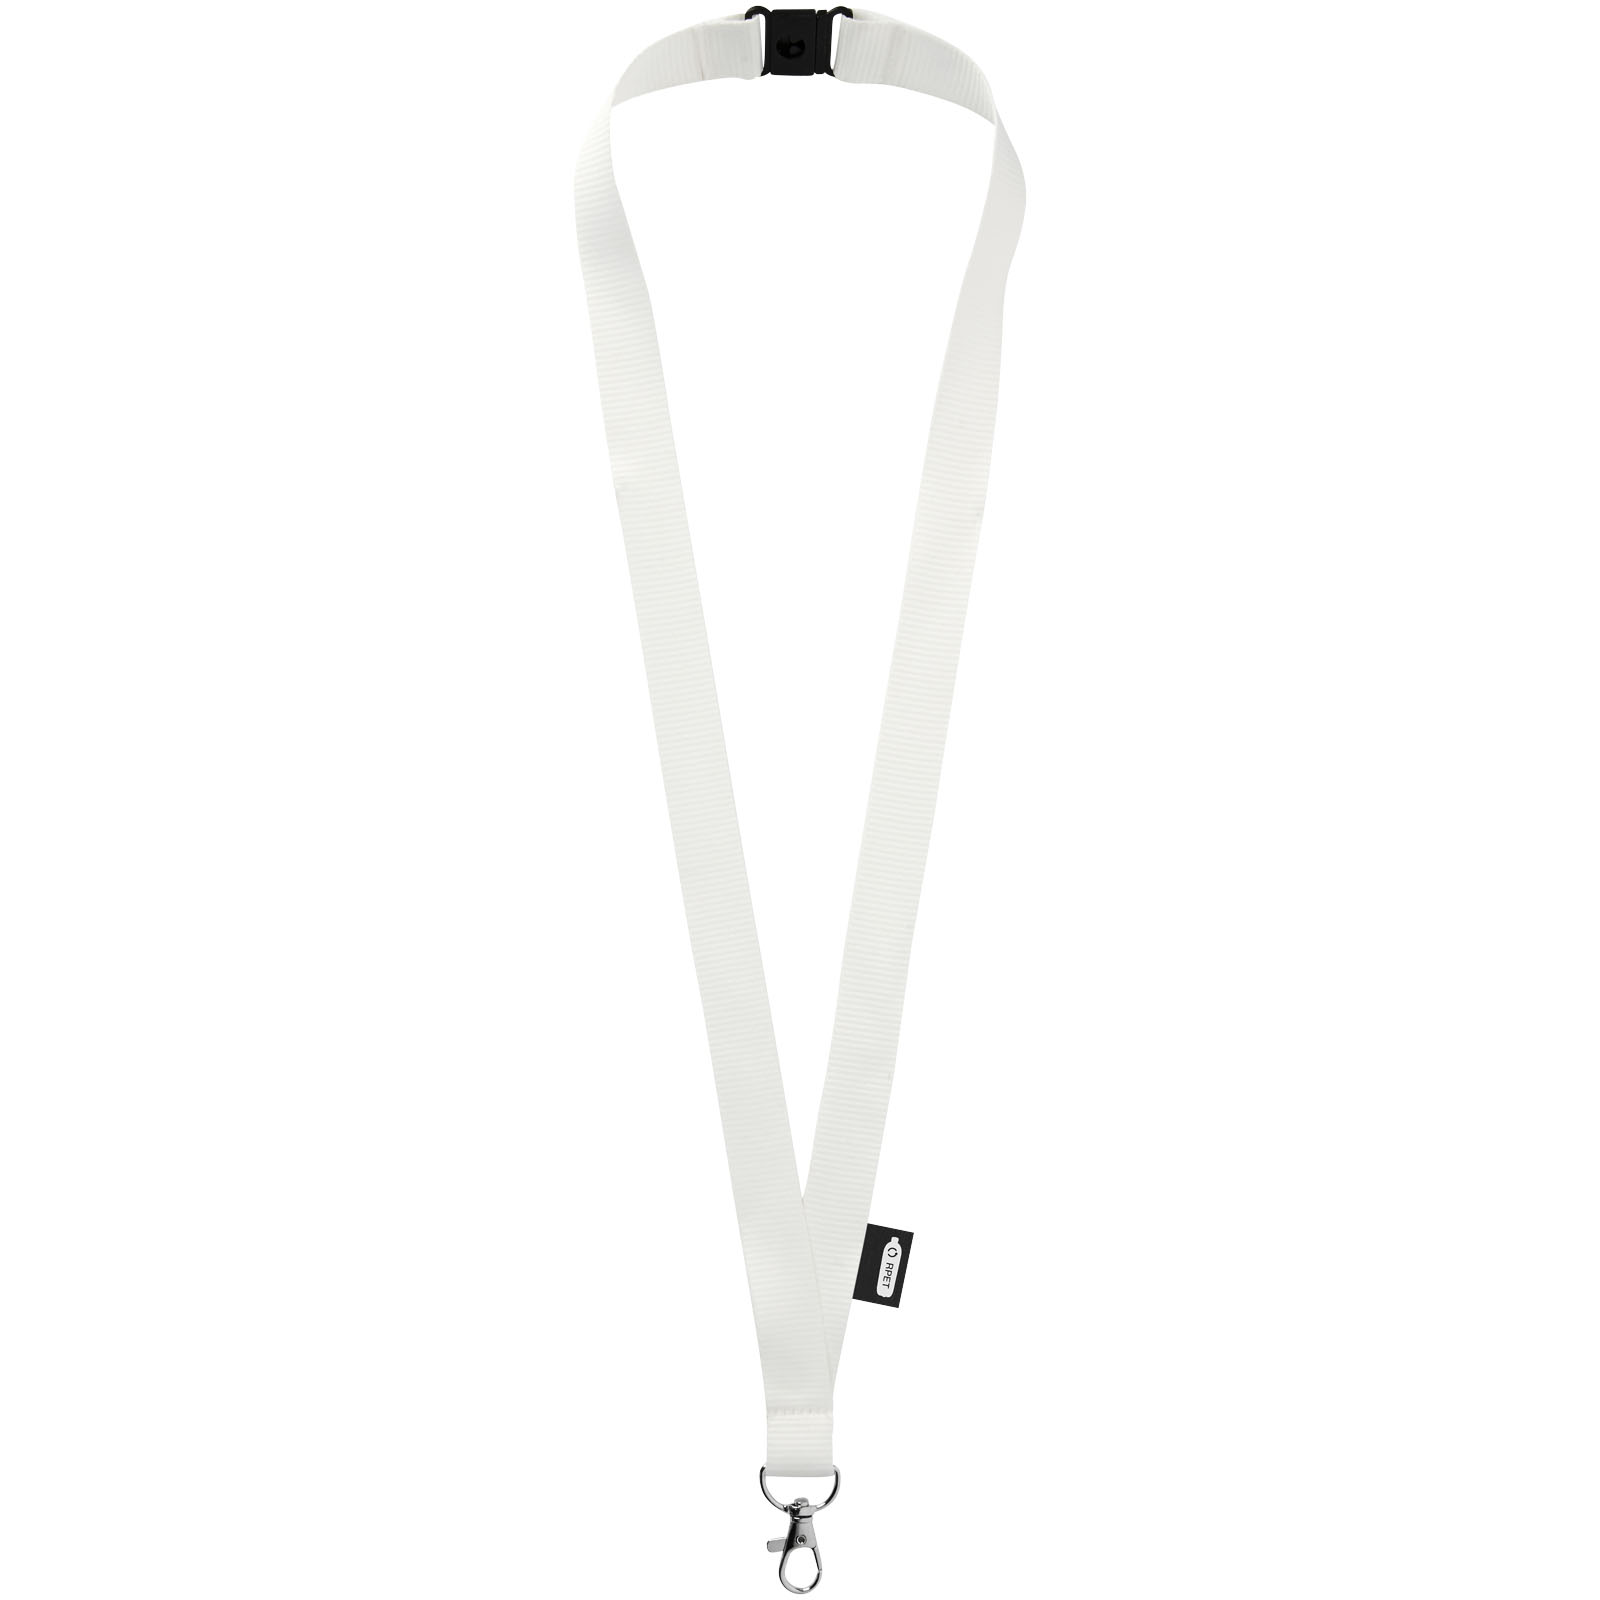 Giveaways - Tom recycled PET lanyard with breakaway closure